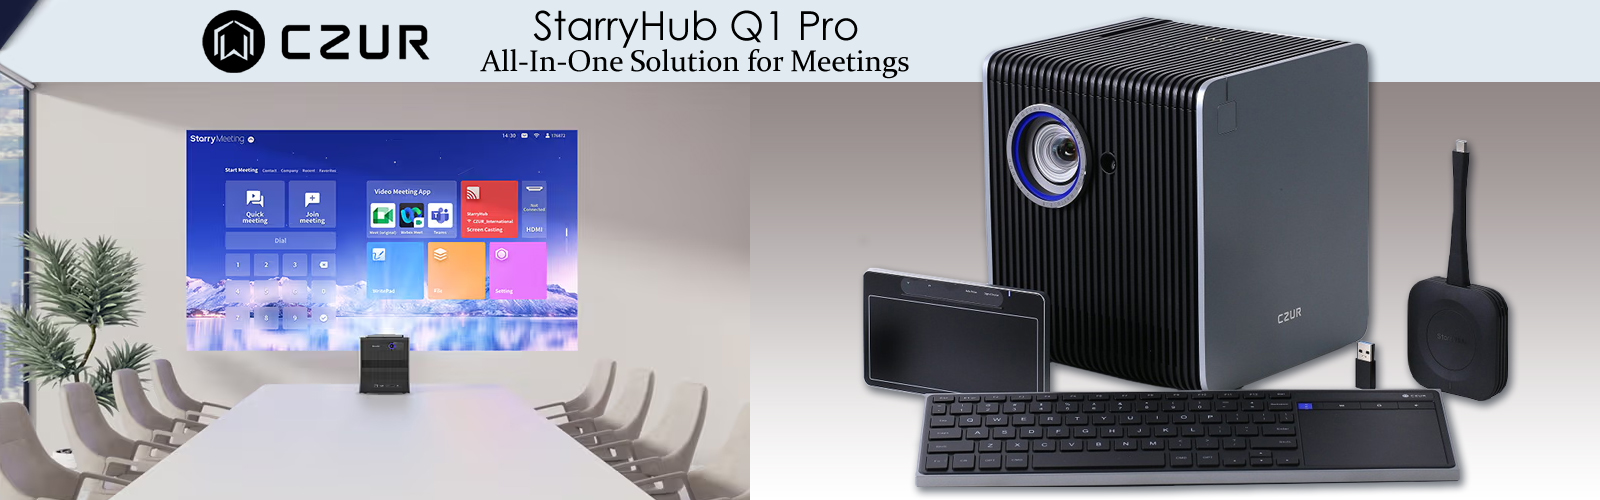 CZUR StarryHub Q1 Pro All-in-One Solution for Meetings